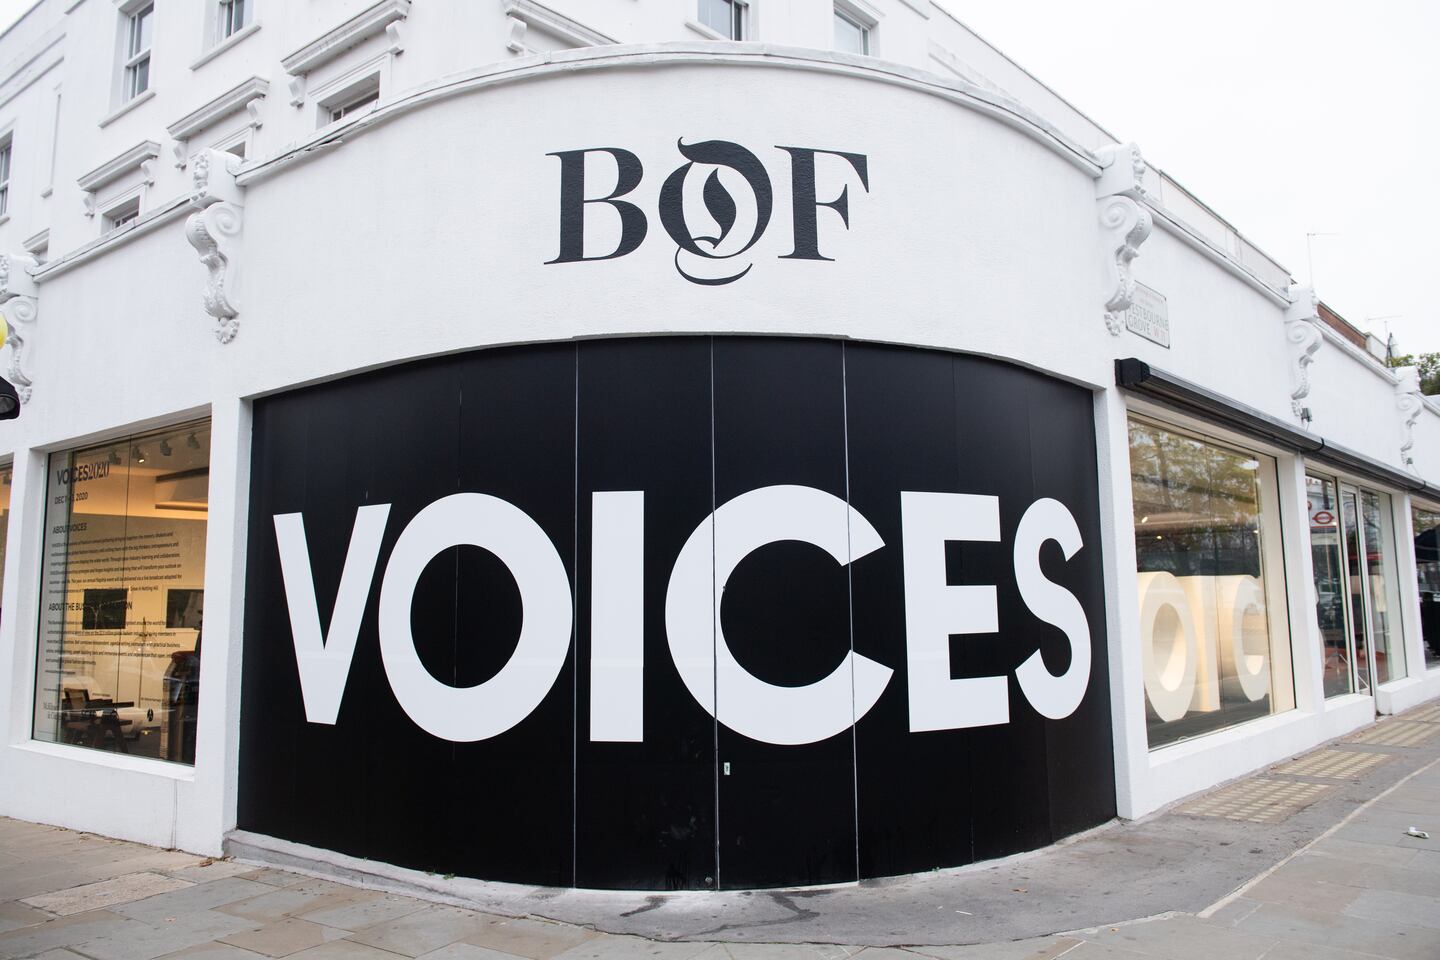 VOICES 2020 will be delivered via a live global broadcast from a pop-up studio in London. BoF.